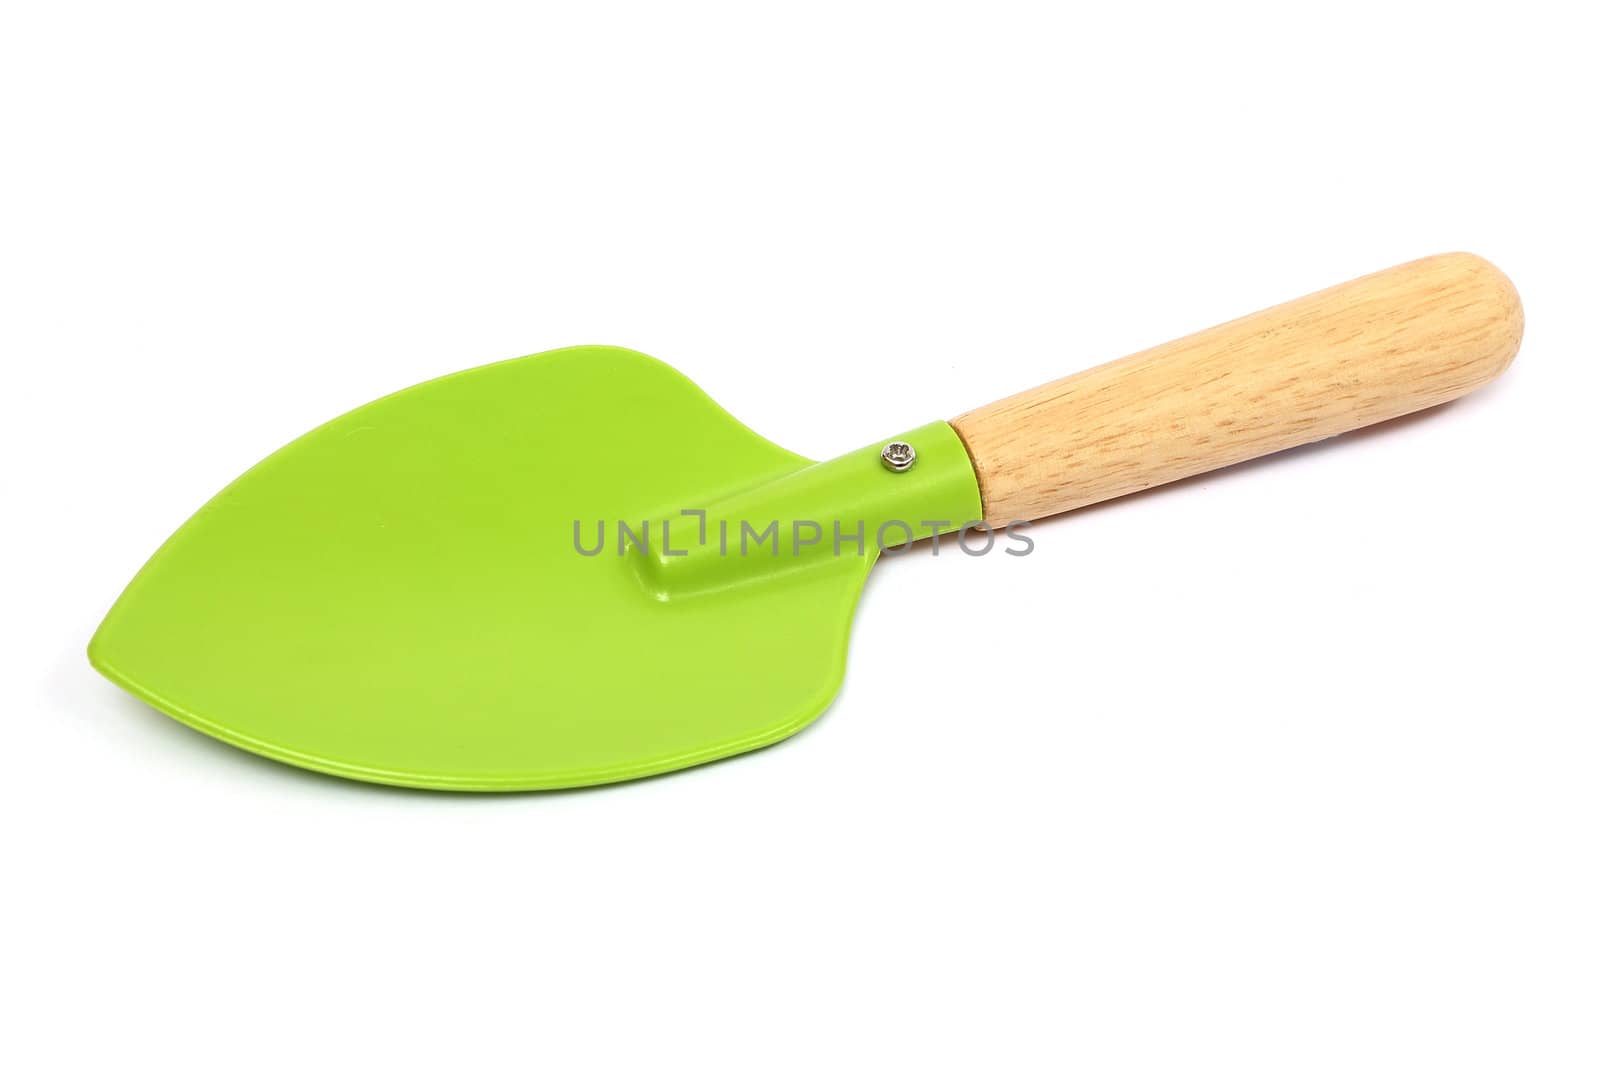 A small garden spade in green on a white background